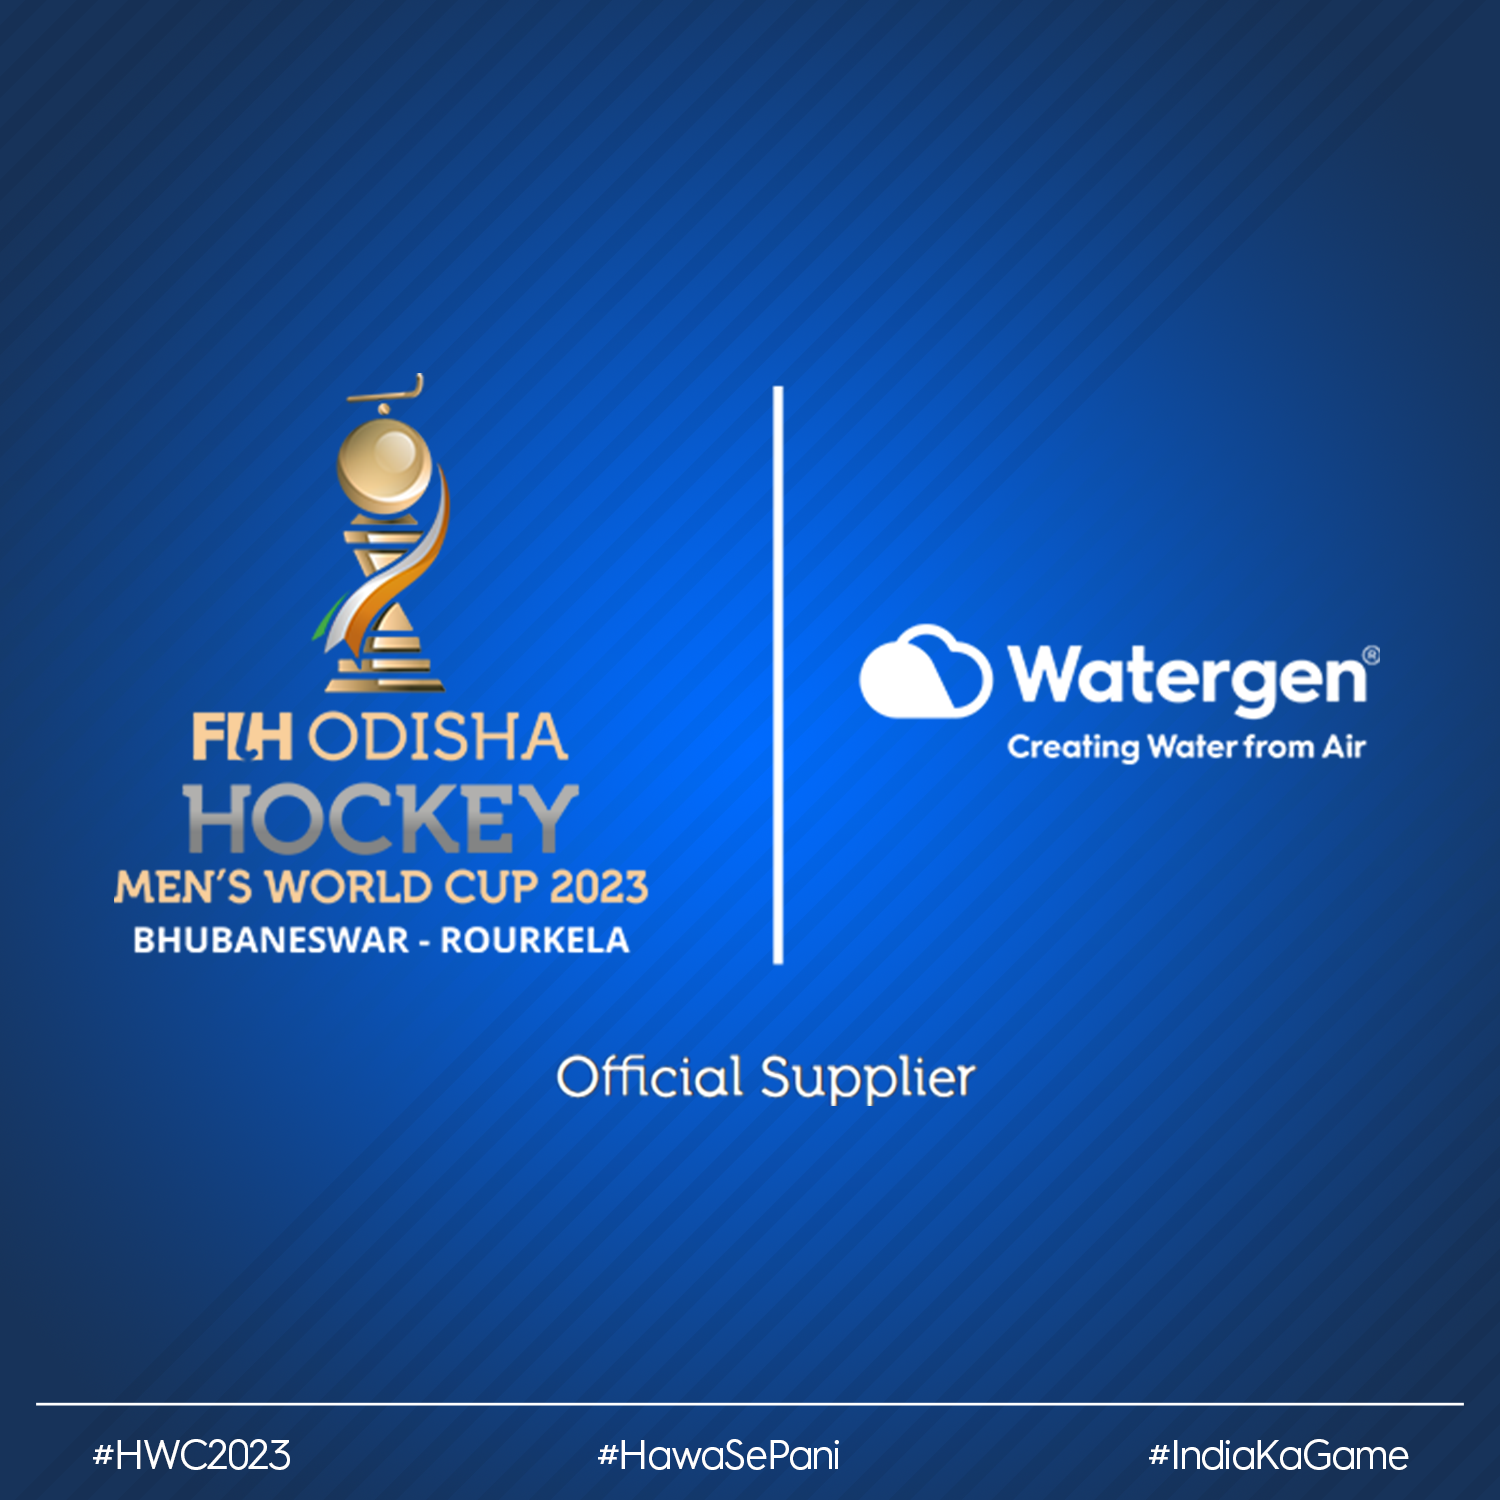 Watergen to Provide ‘Drinking Water from Air’ during the FIH Odisha Hockey Men's World Cup 2023 Bhubaneswar - Rourkela as Sustainability Partner